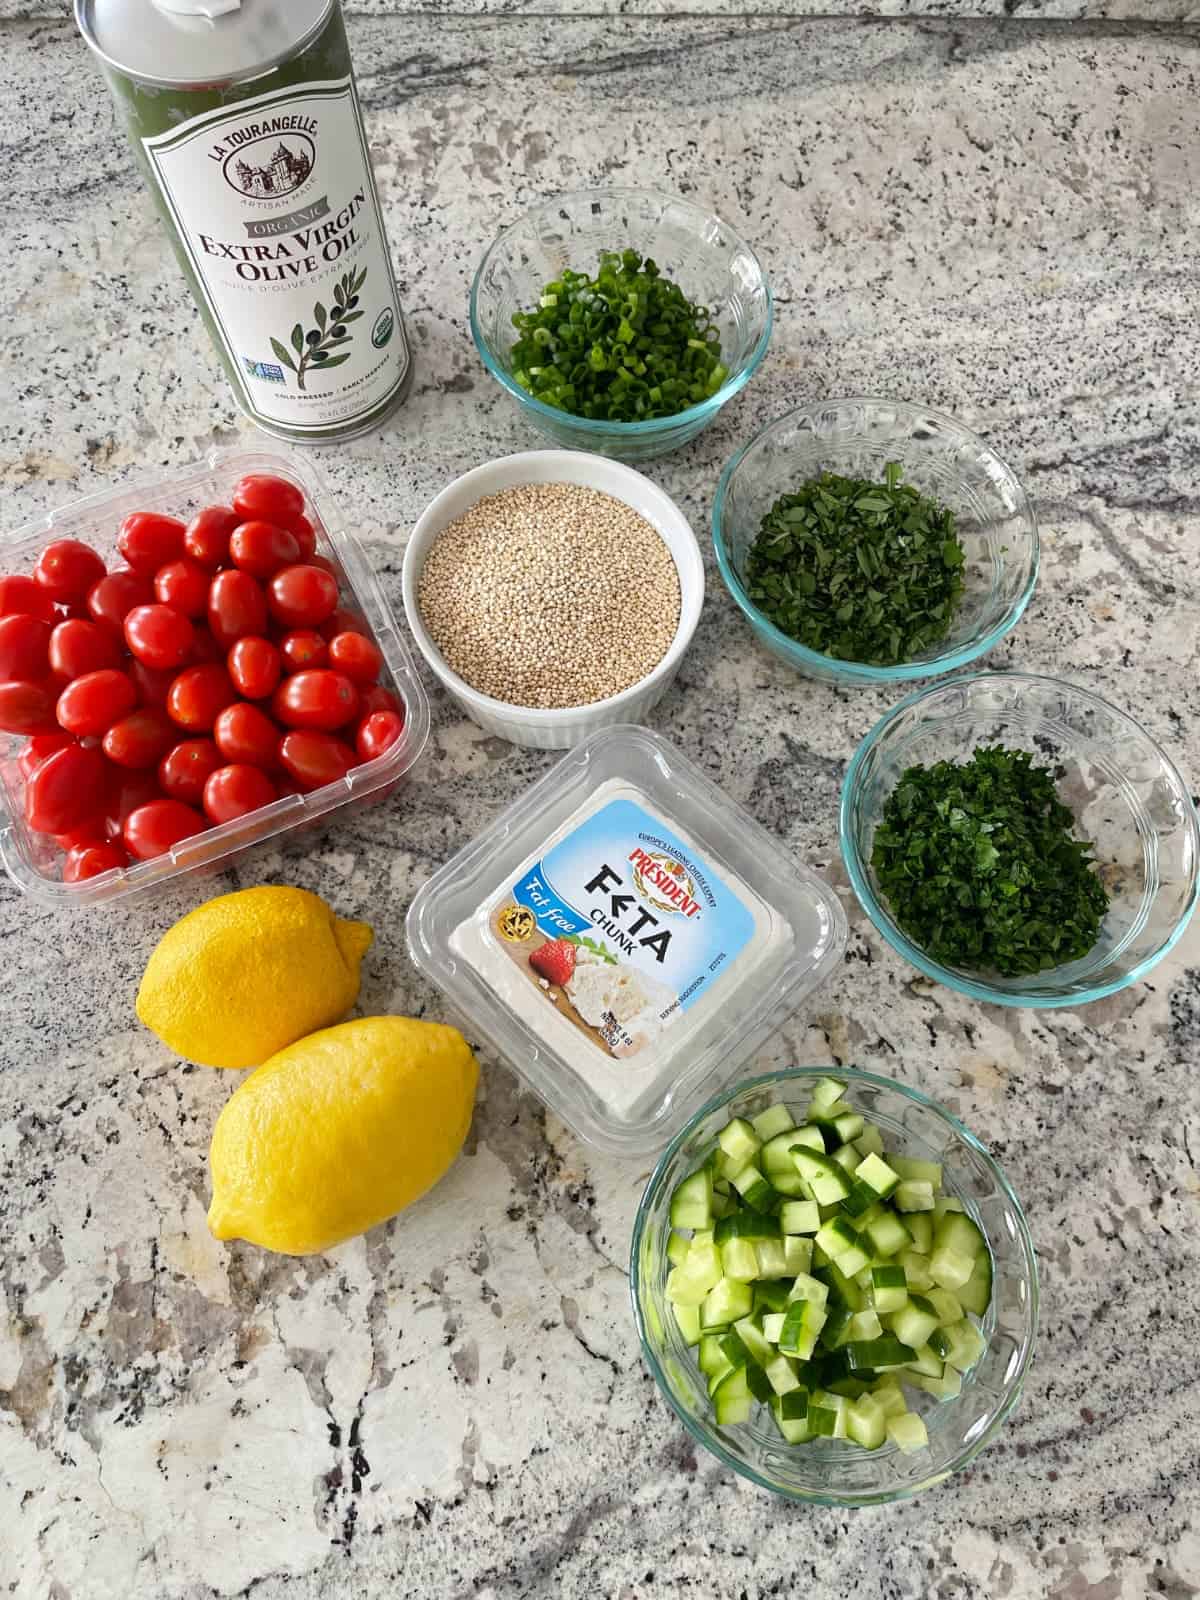 Ingredients including chopped cucumber, two lemons, cherry tomatoes, fat free feta cheese, quinoa, green onions, parsley, mint and bottle of olive oil on granite counter.